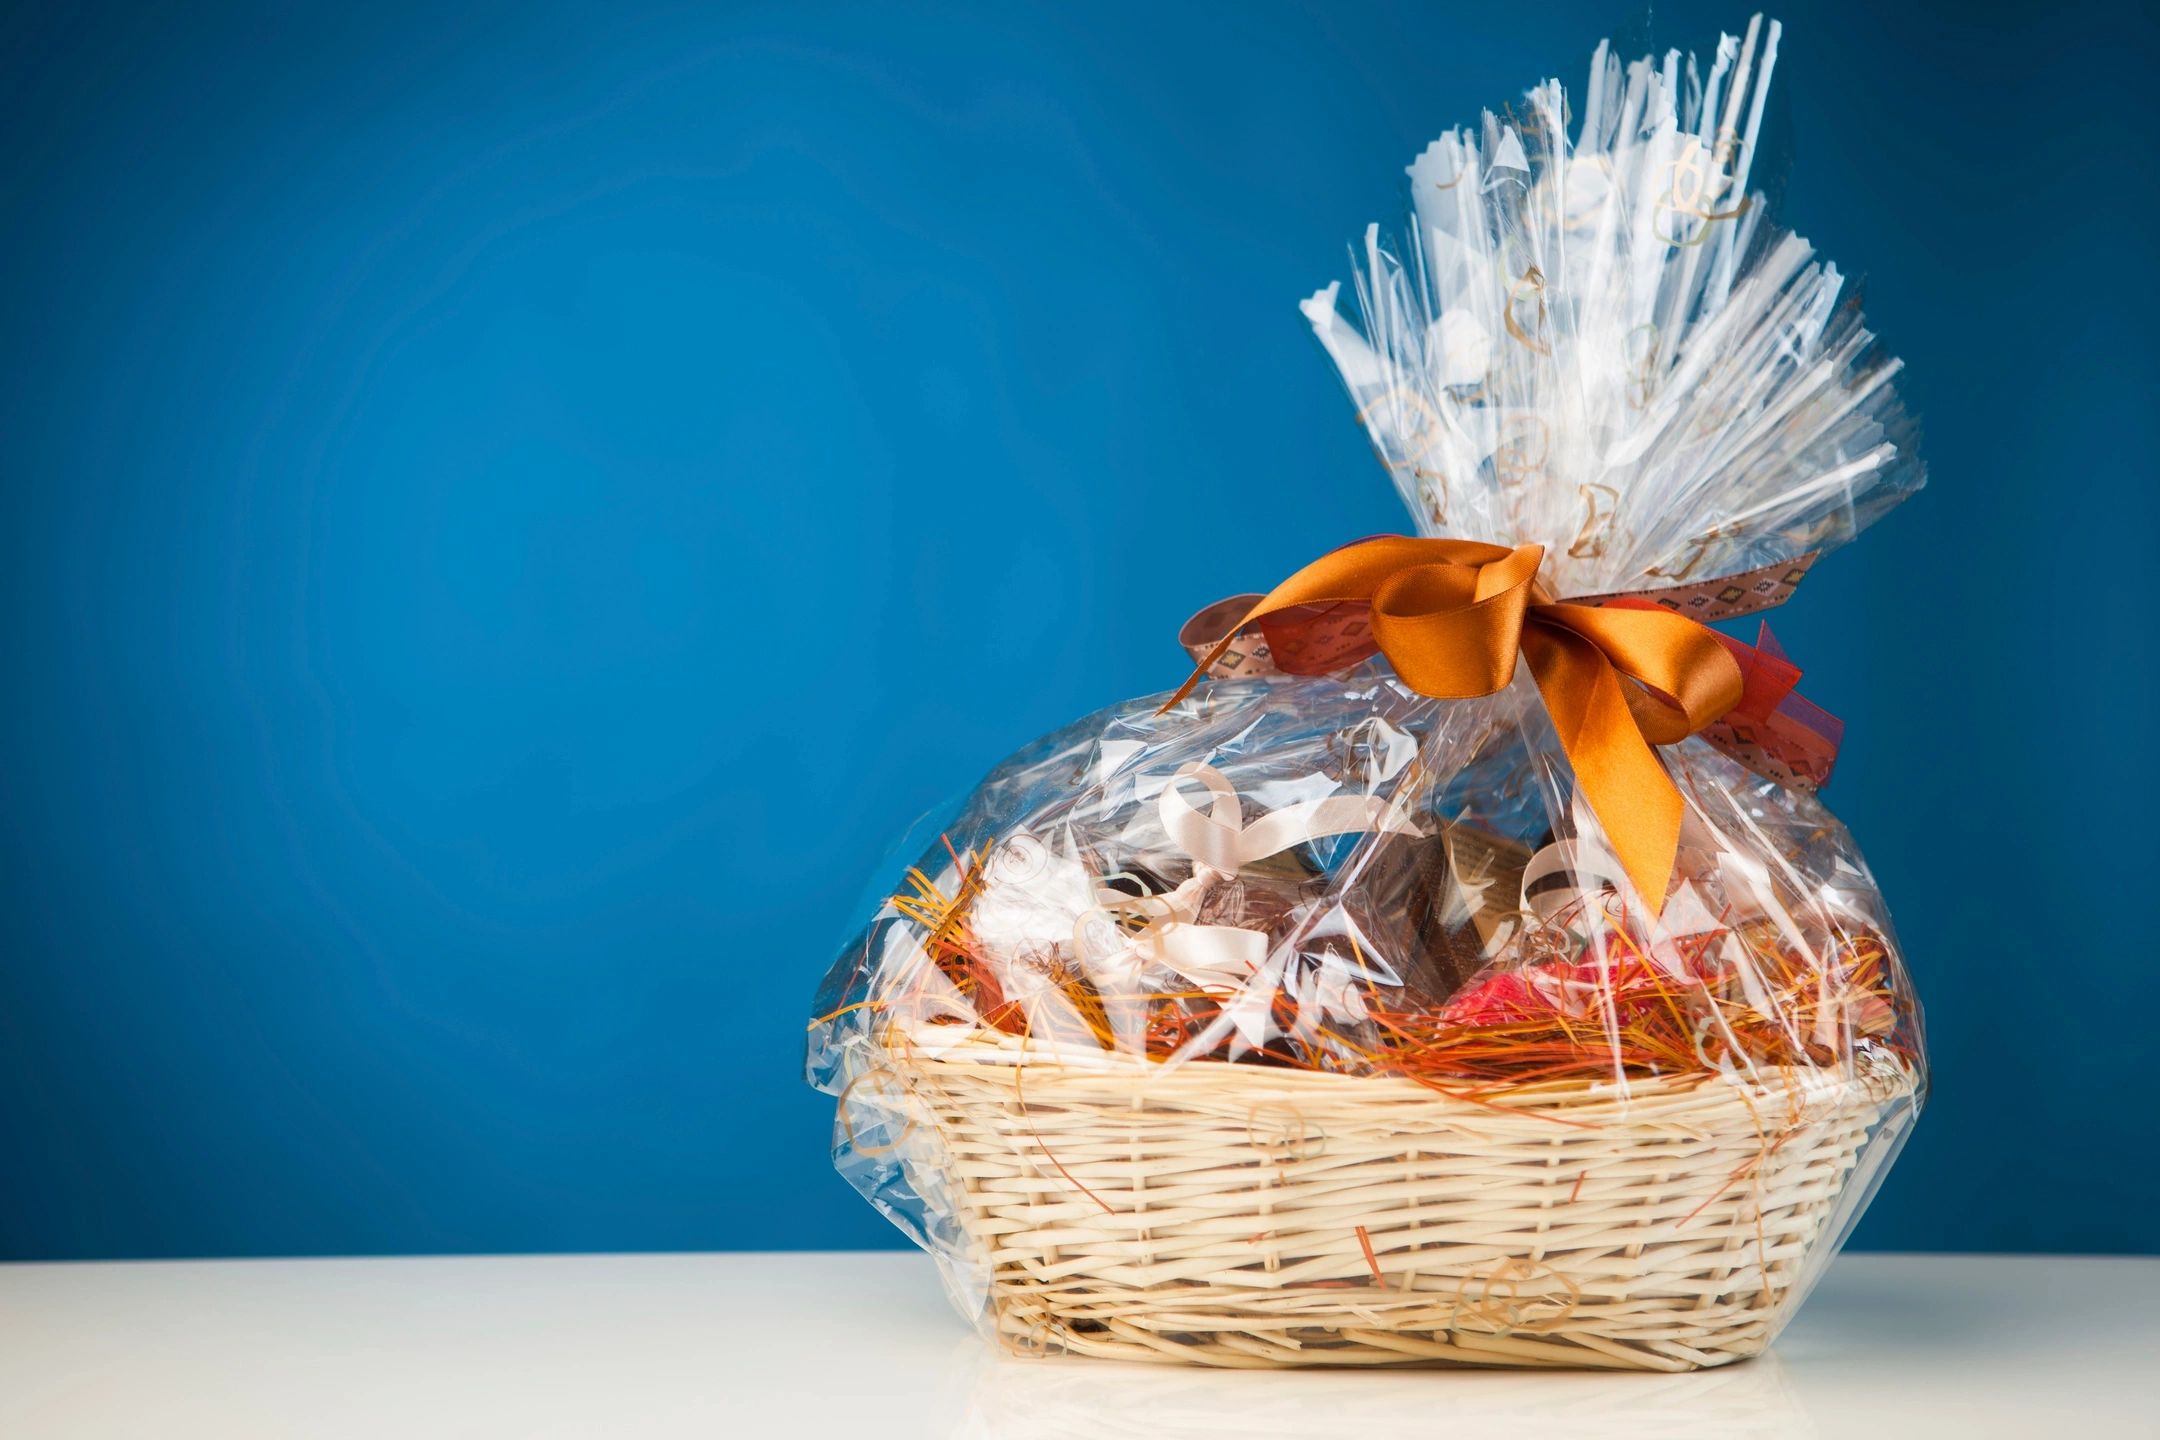 Real Estate Agent Gift Ideas - Say Thank You as a Realtor